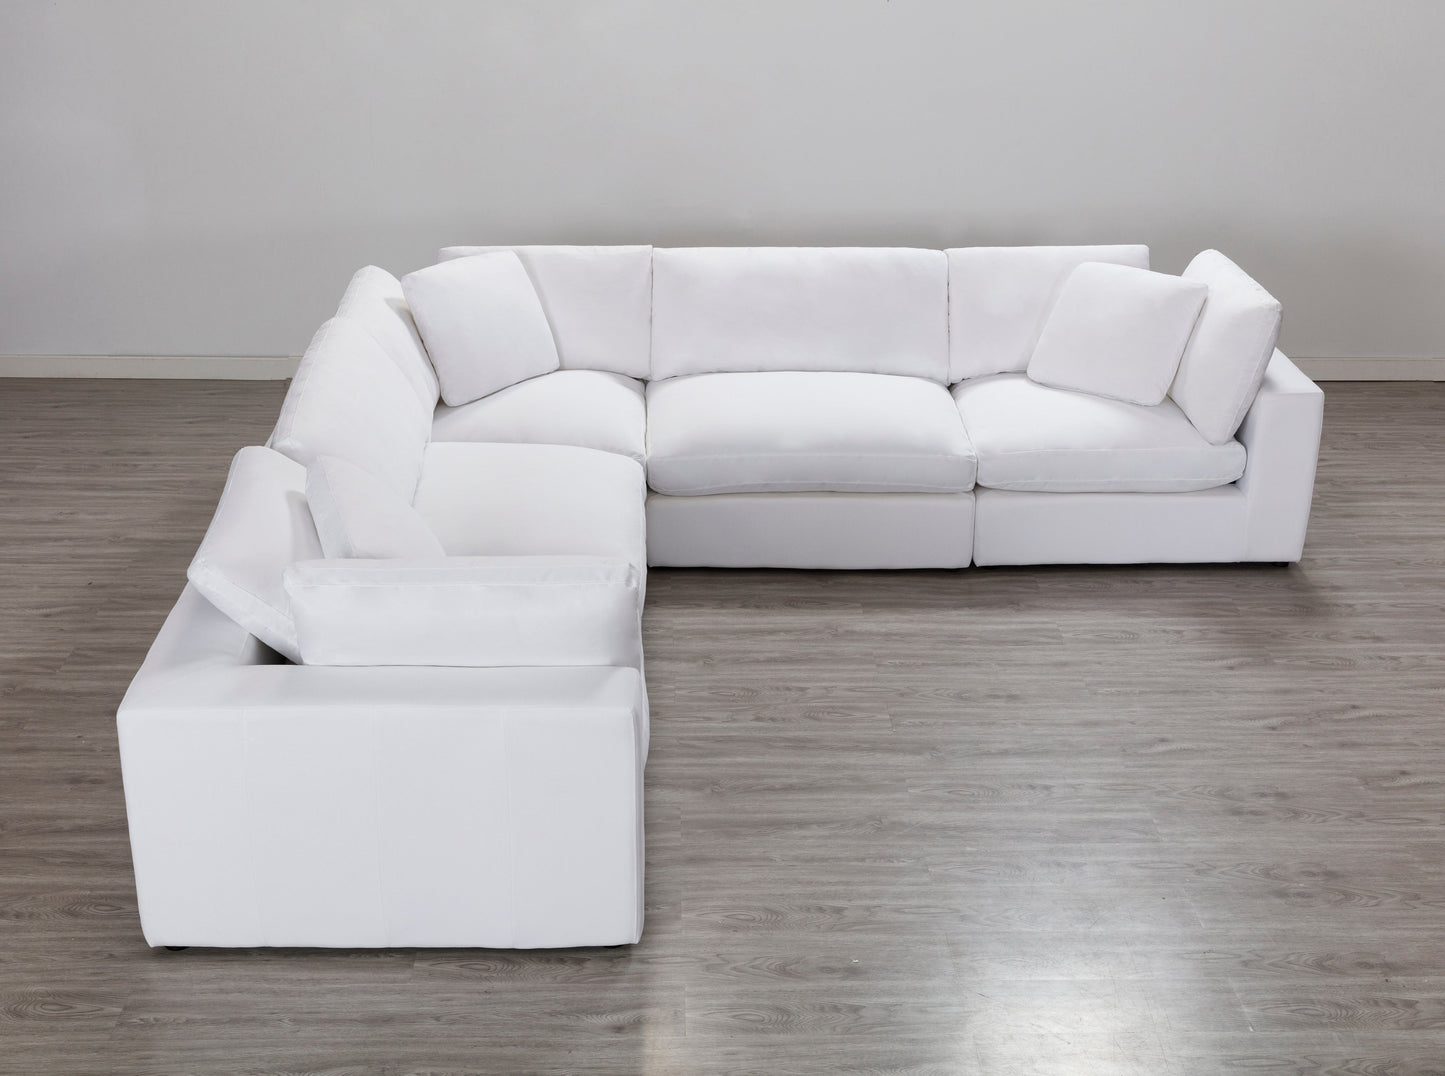 Rivas Contemporary Feather Fill 6-Piece Modular L-Sectional Sofa with Ottoman, White